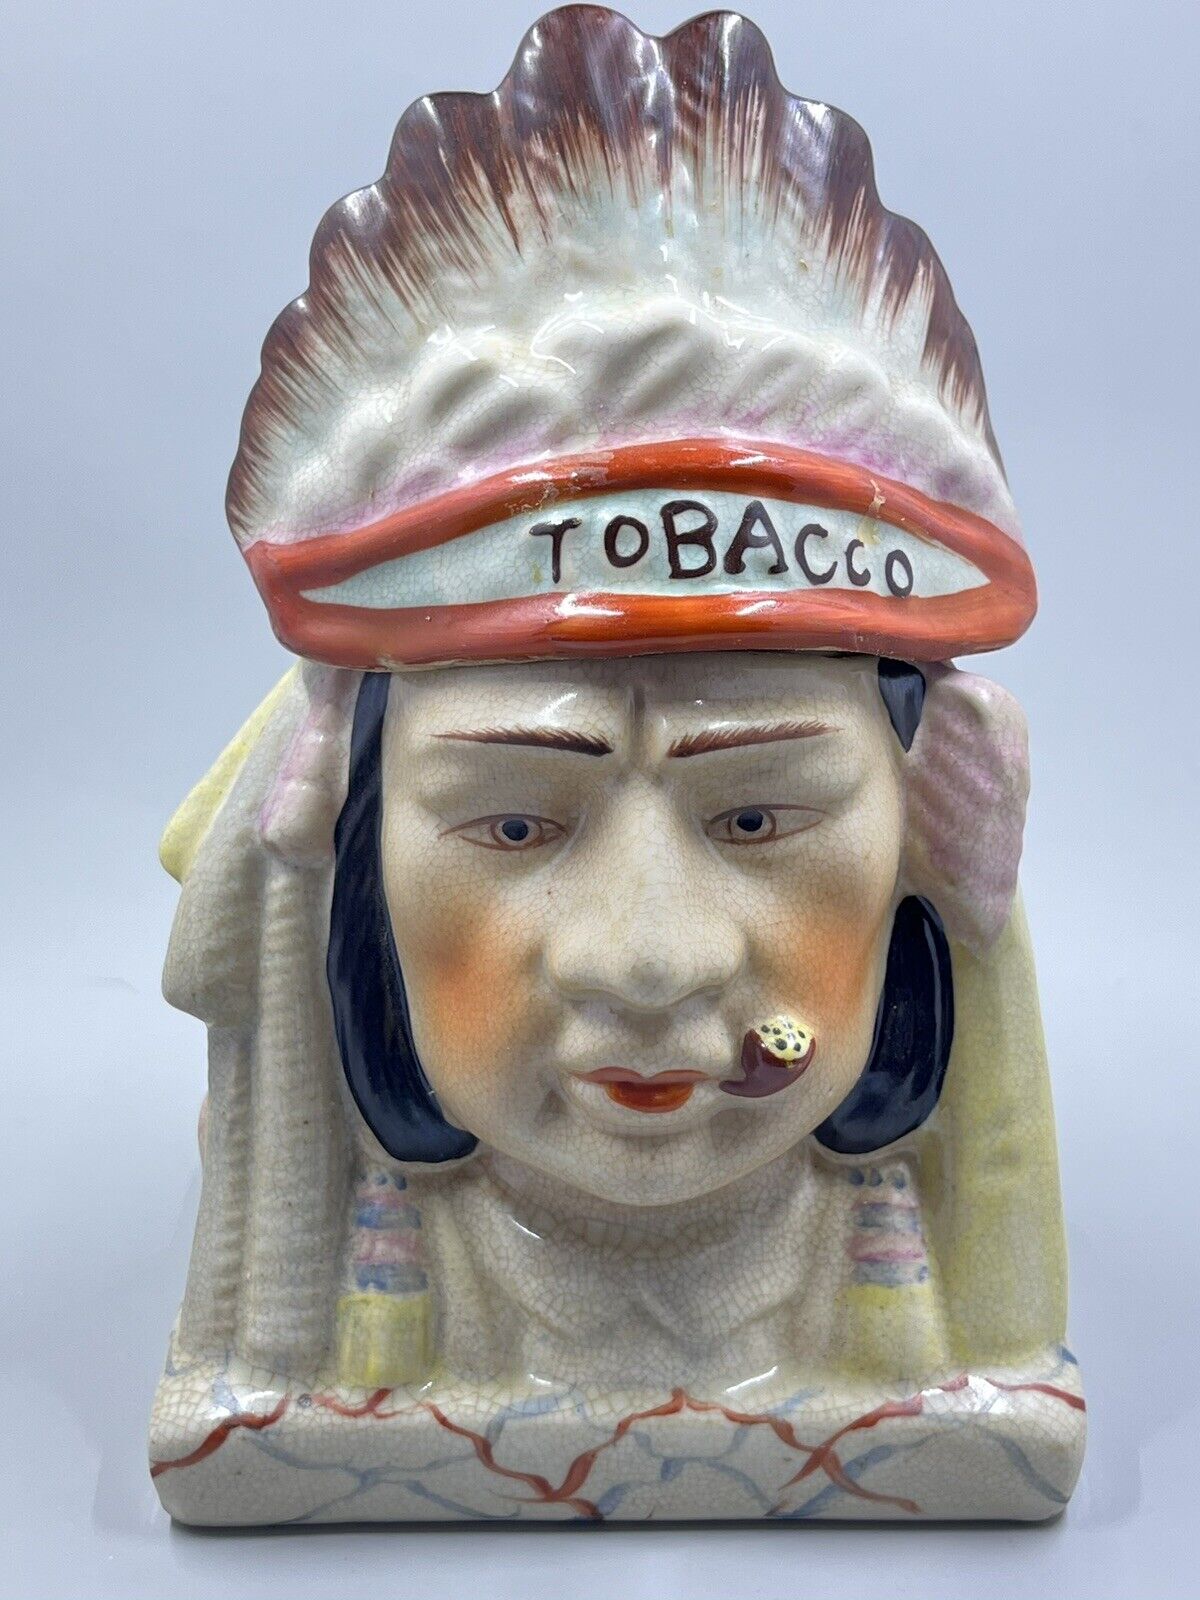 Vintage 1930s-40s Headdress Native American Tobacco Humidor Hand Painted